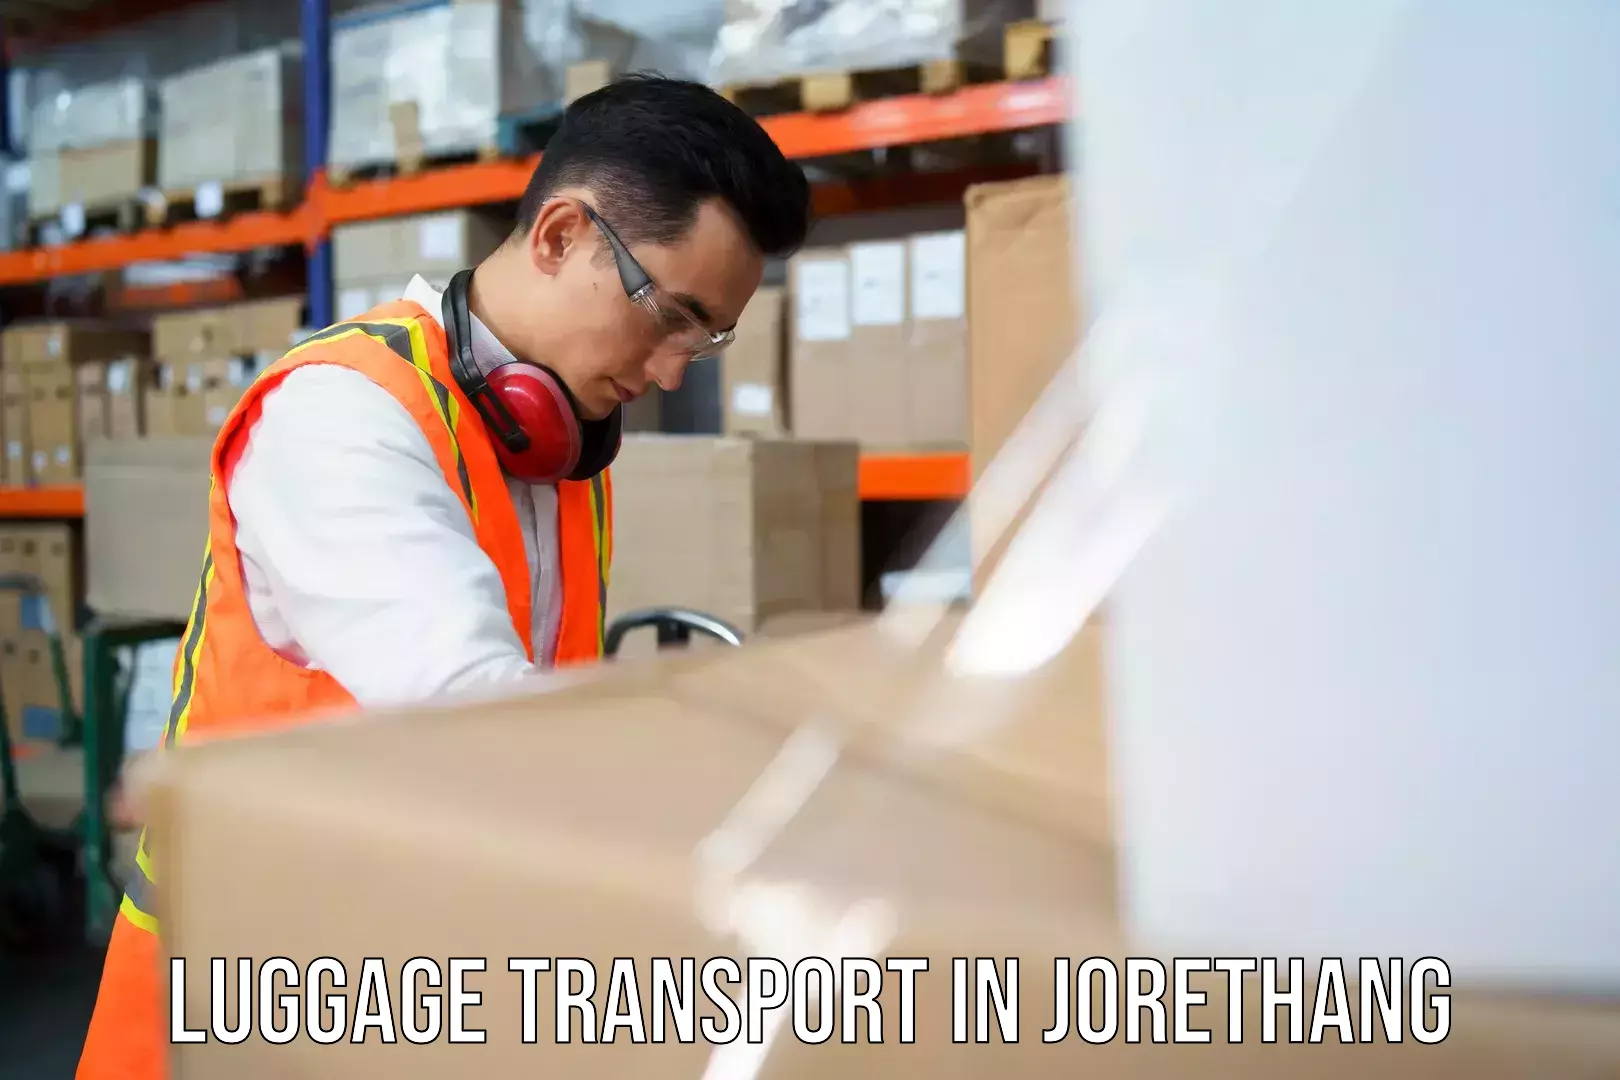 Luggage shipment processing in Jorethang